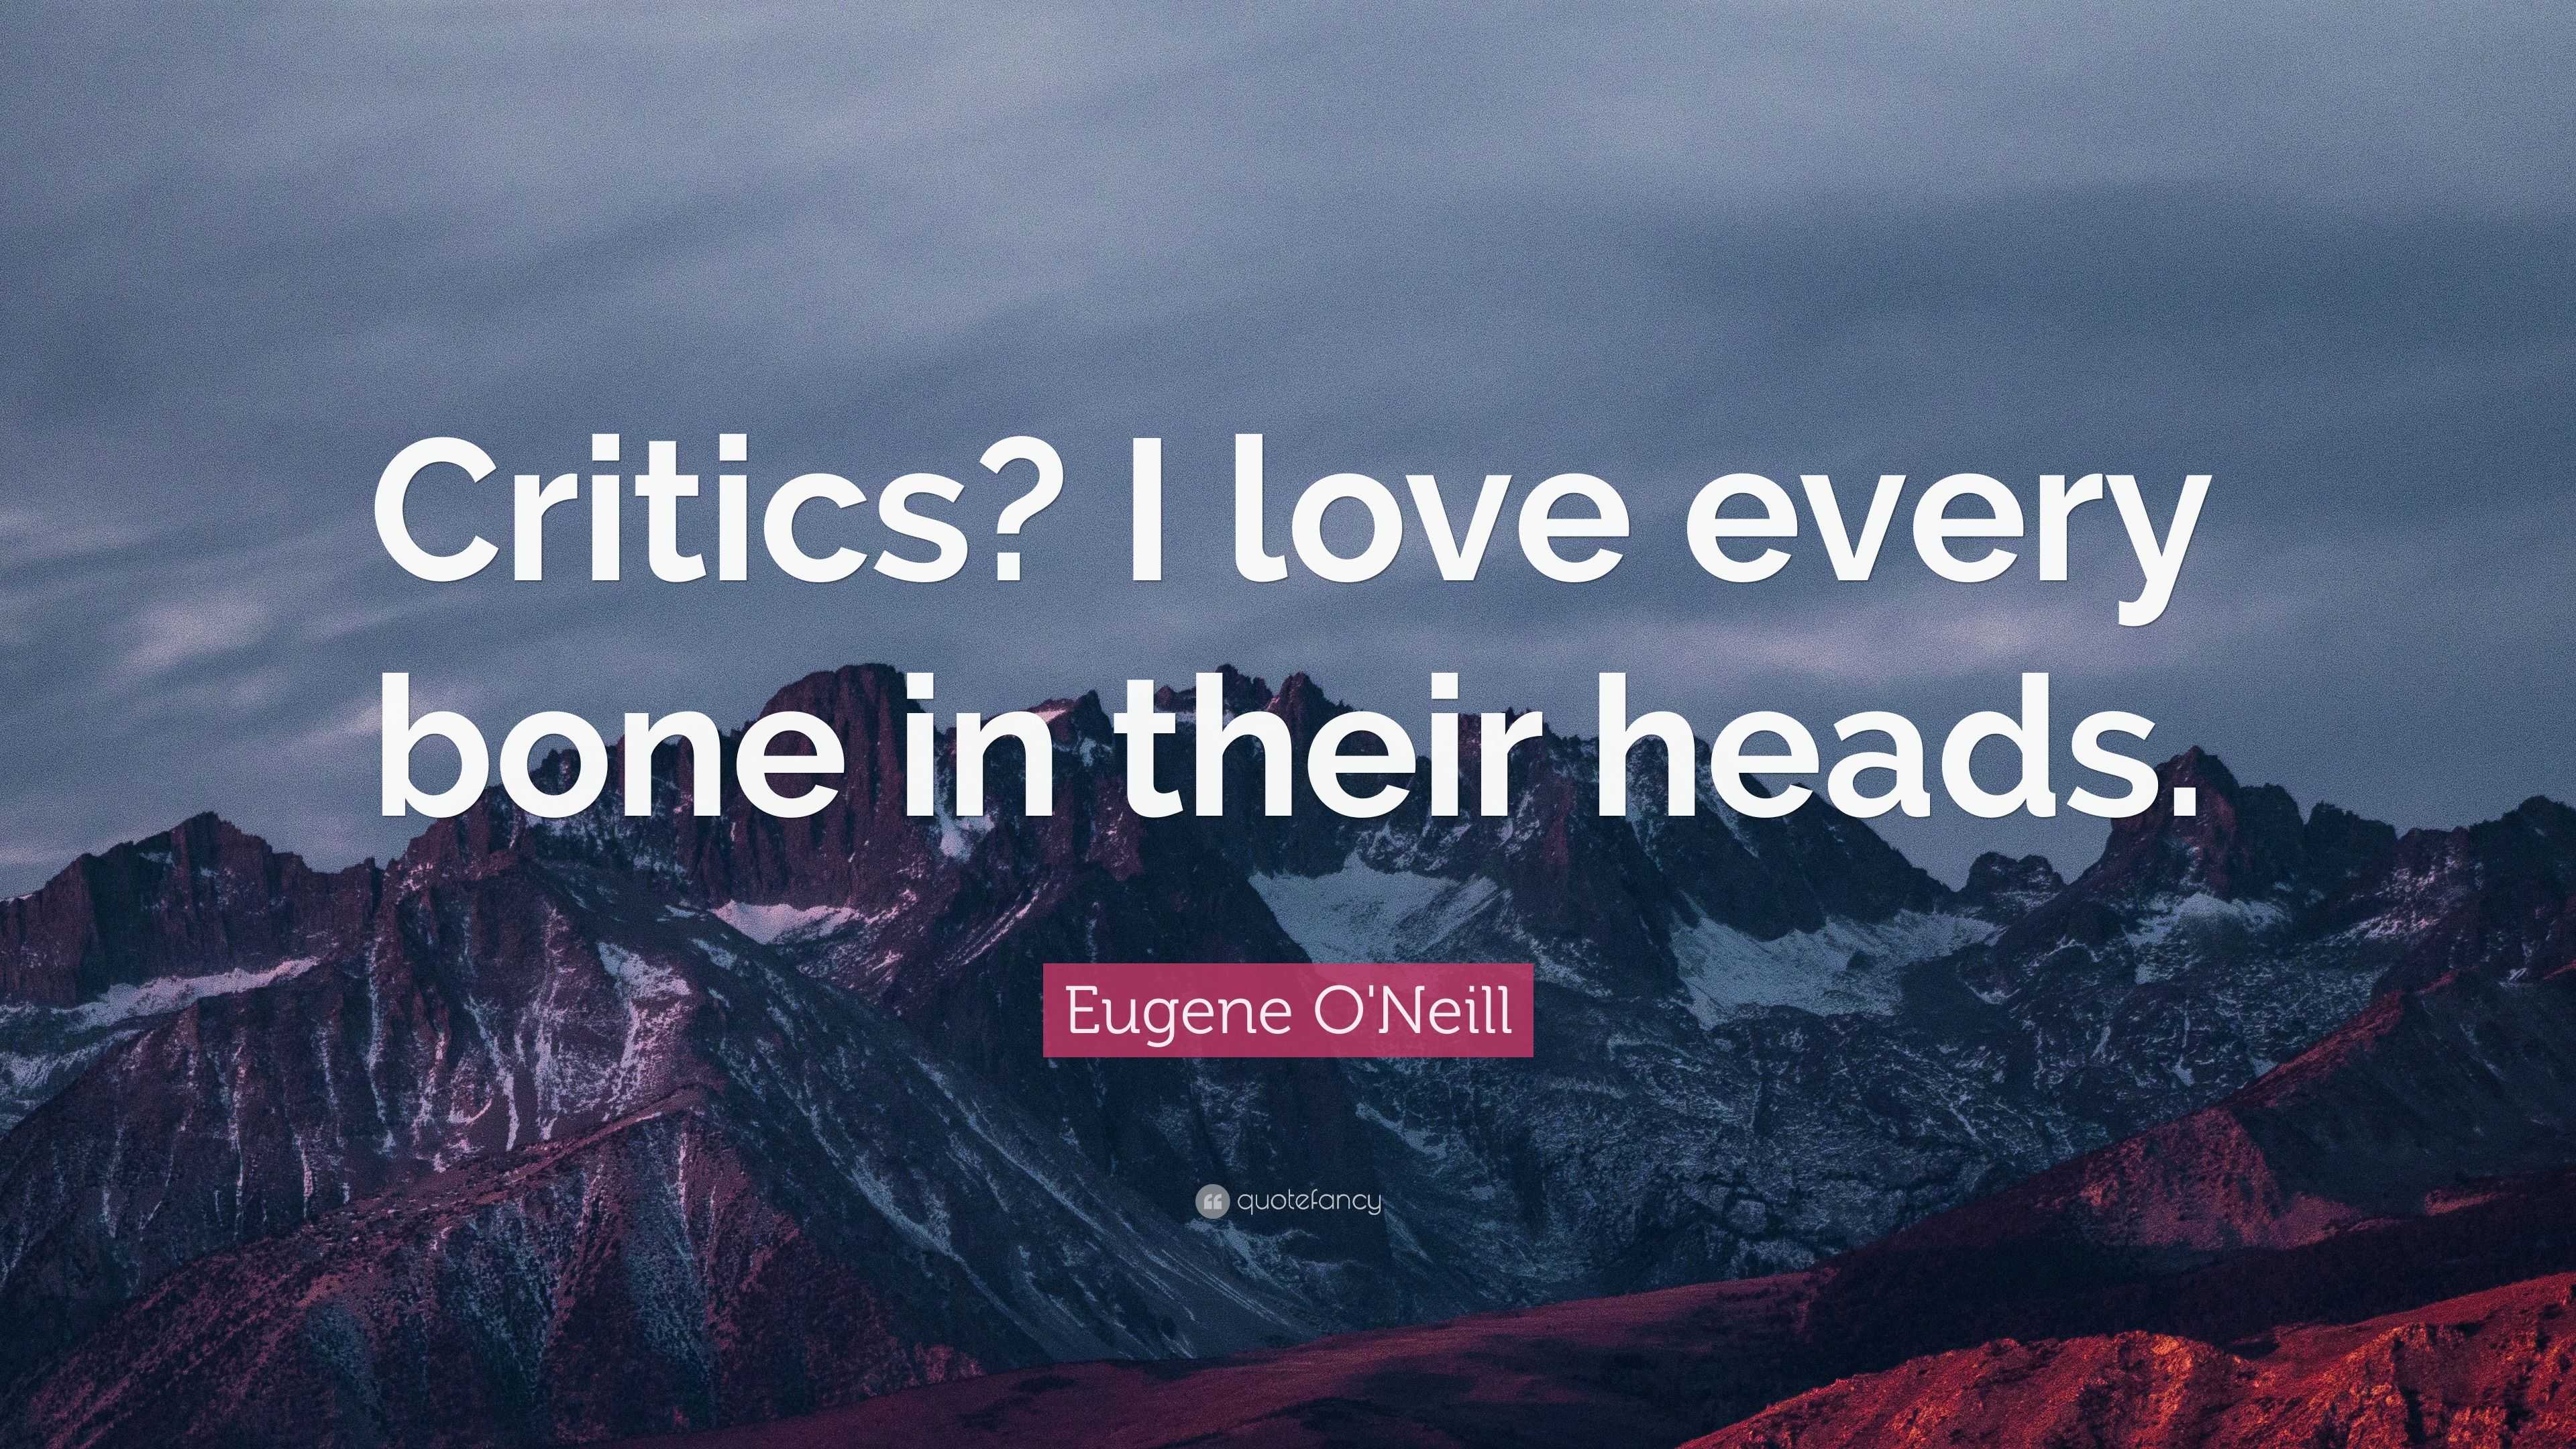 Eugene O'Neill Quote: “Critics? I love every bone in their heads.”